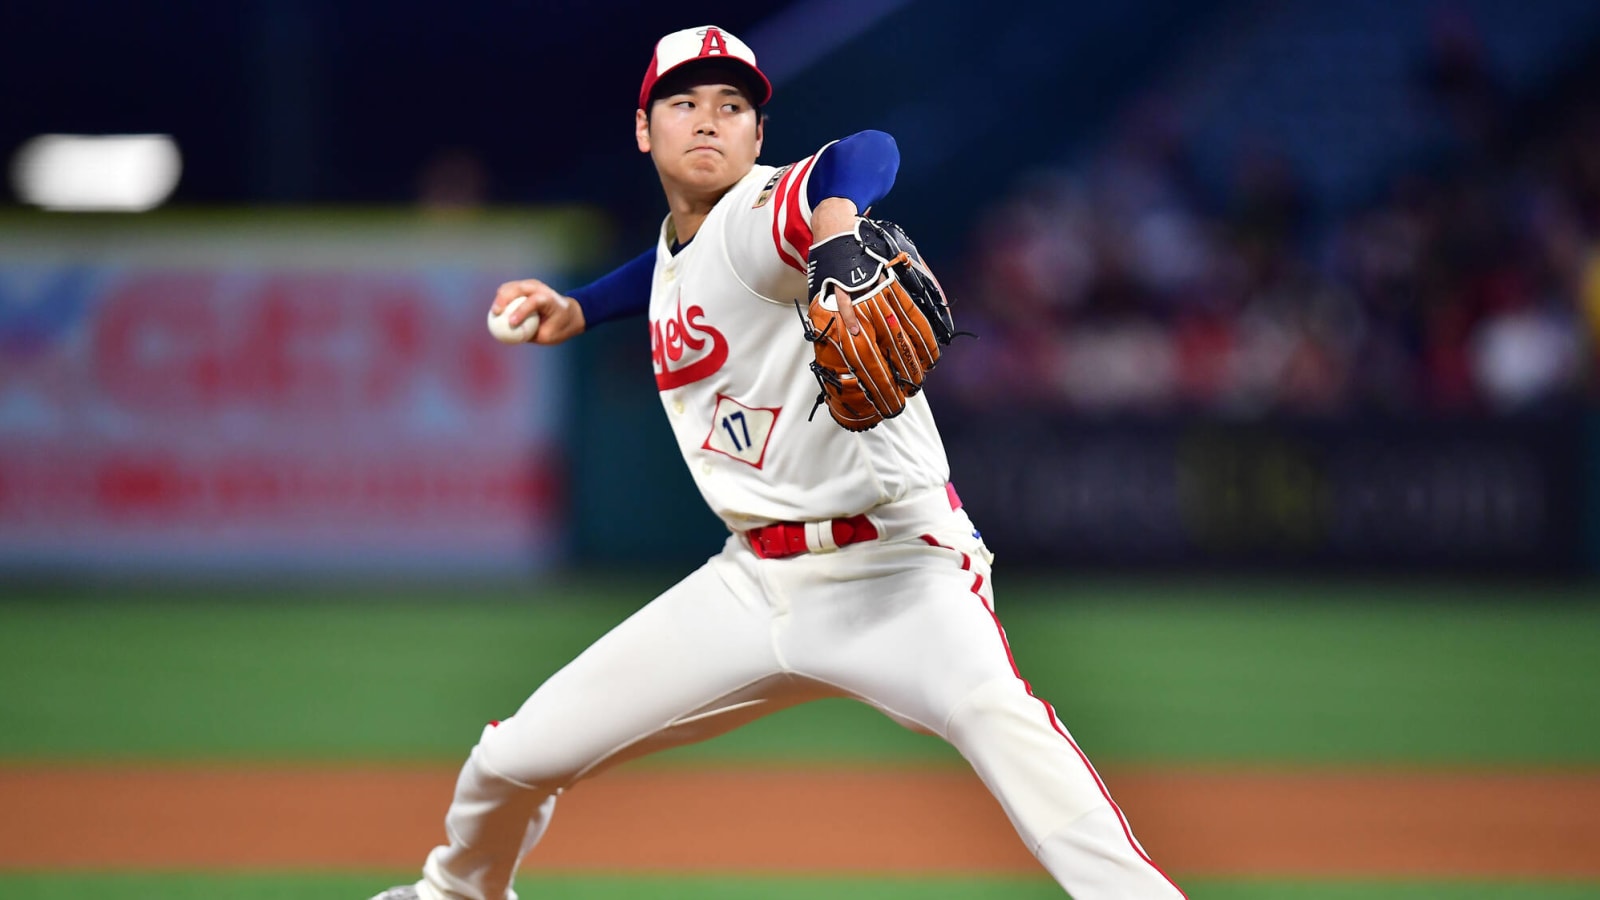 Shohei Ohtani broke another record previously held by Babe Ruth as the Angels lose 3-1 to the Houston Astros